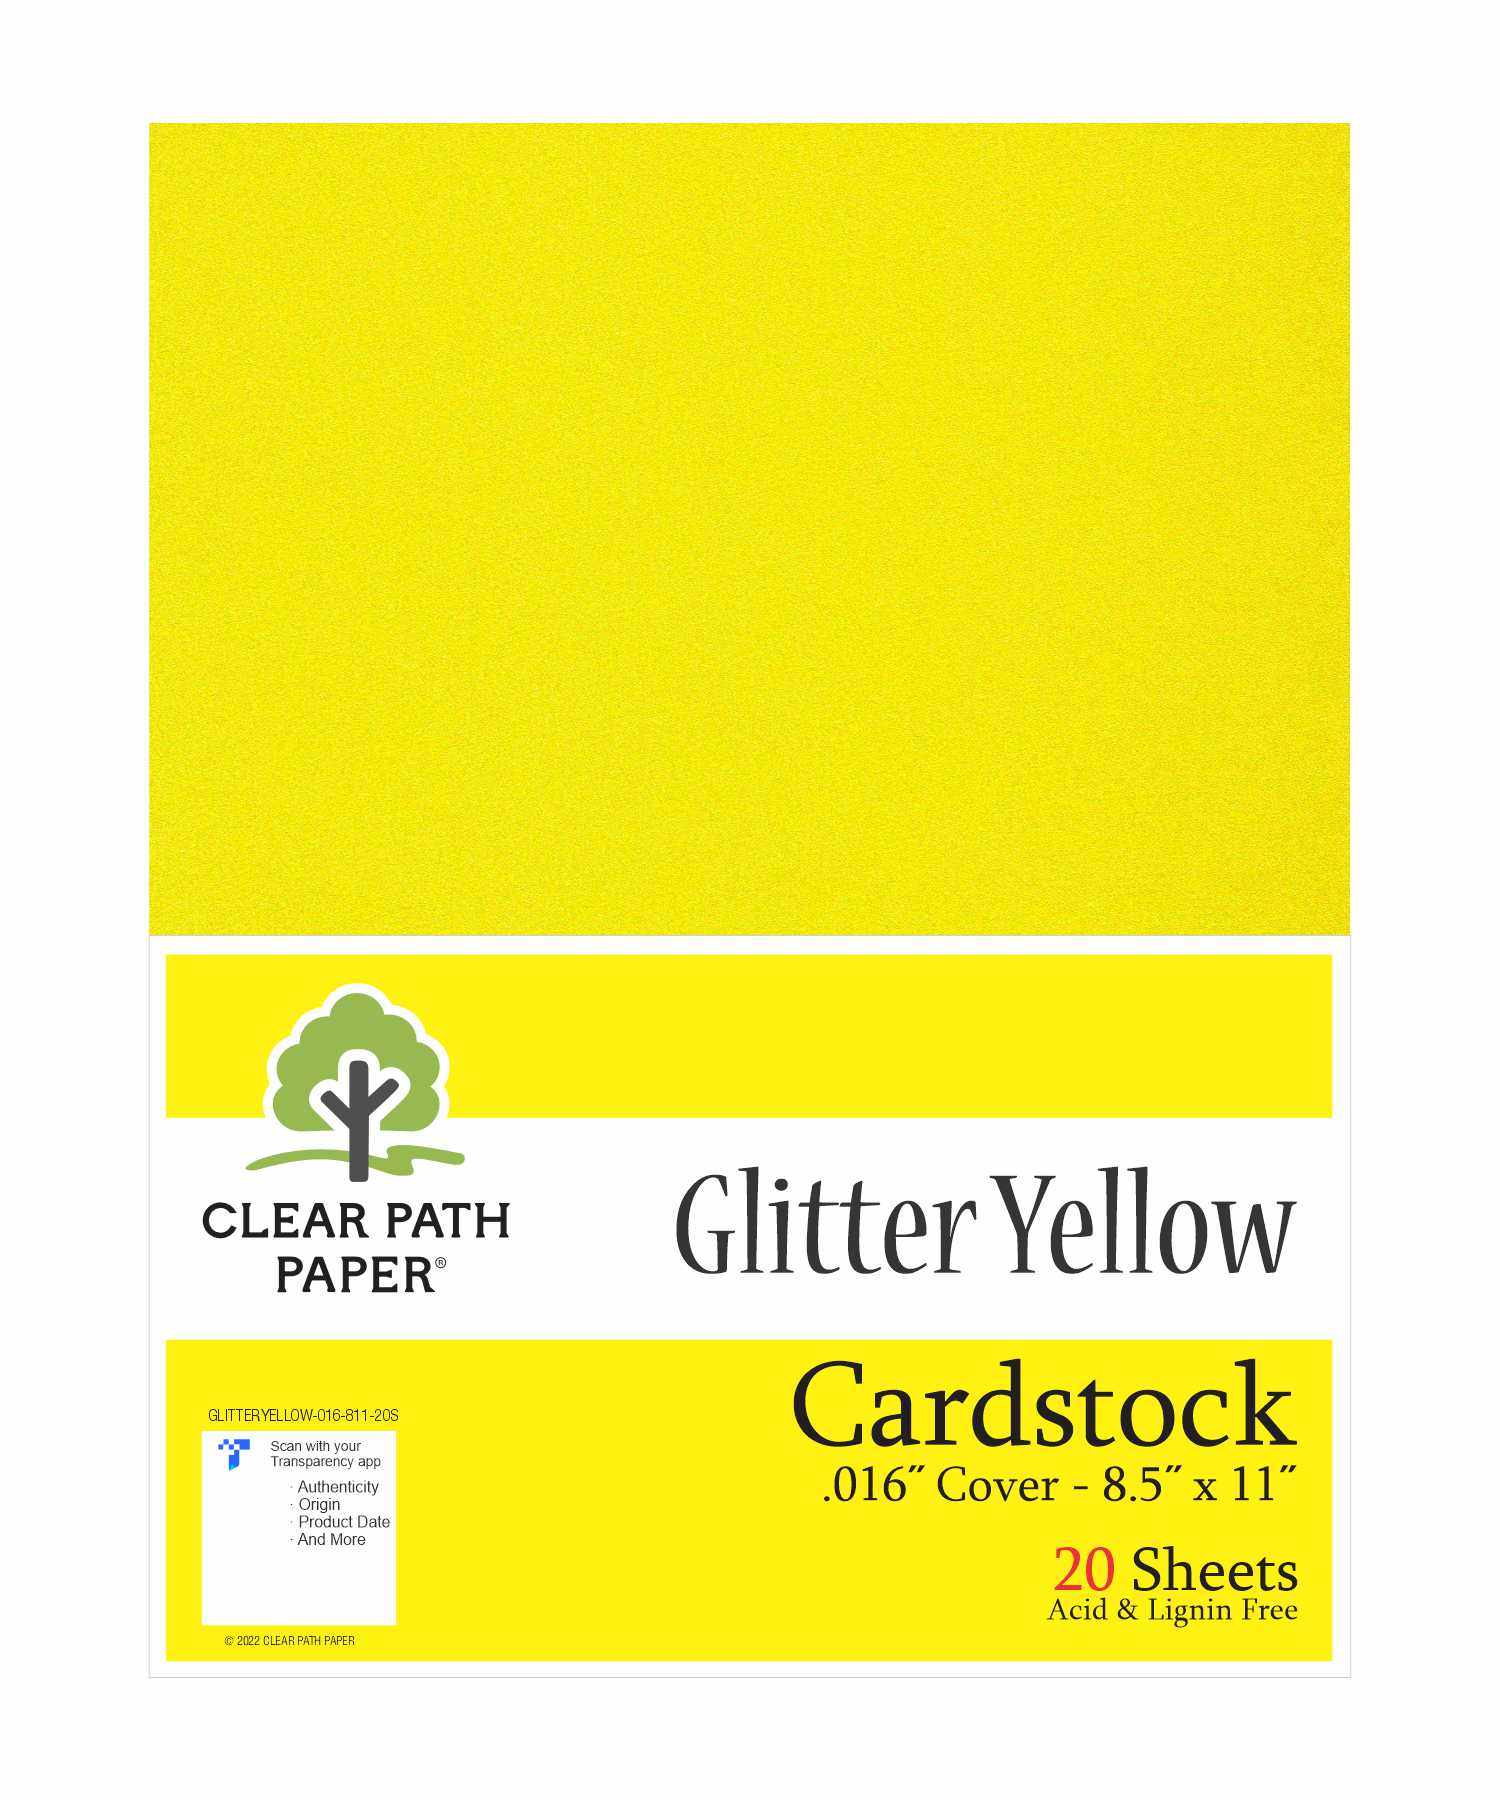 Glitter Yellow Cardstock - 8.5 x 11 inch - .016 Thick - 20 Sheets - Clear  Path Paper